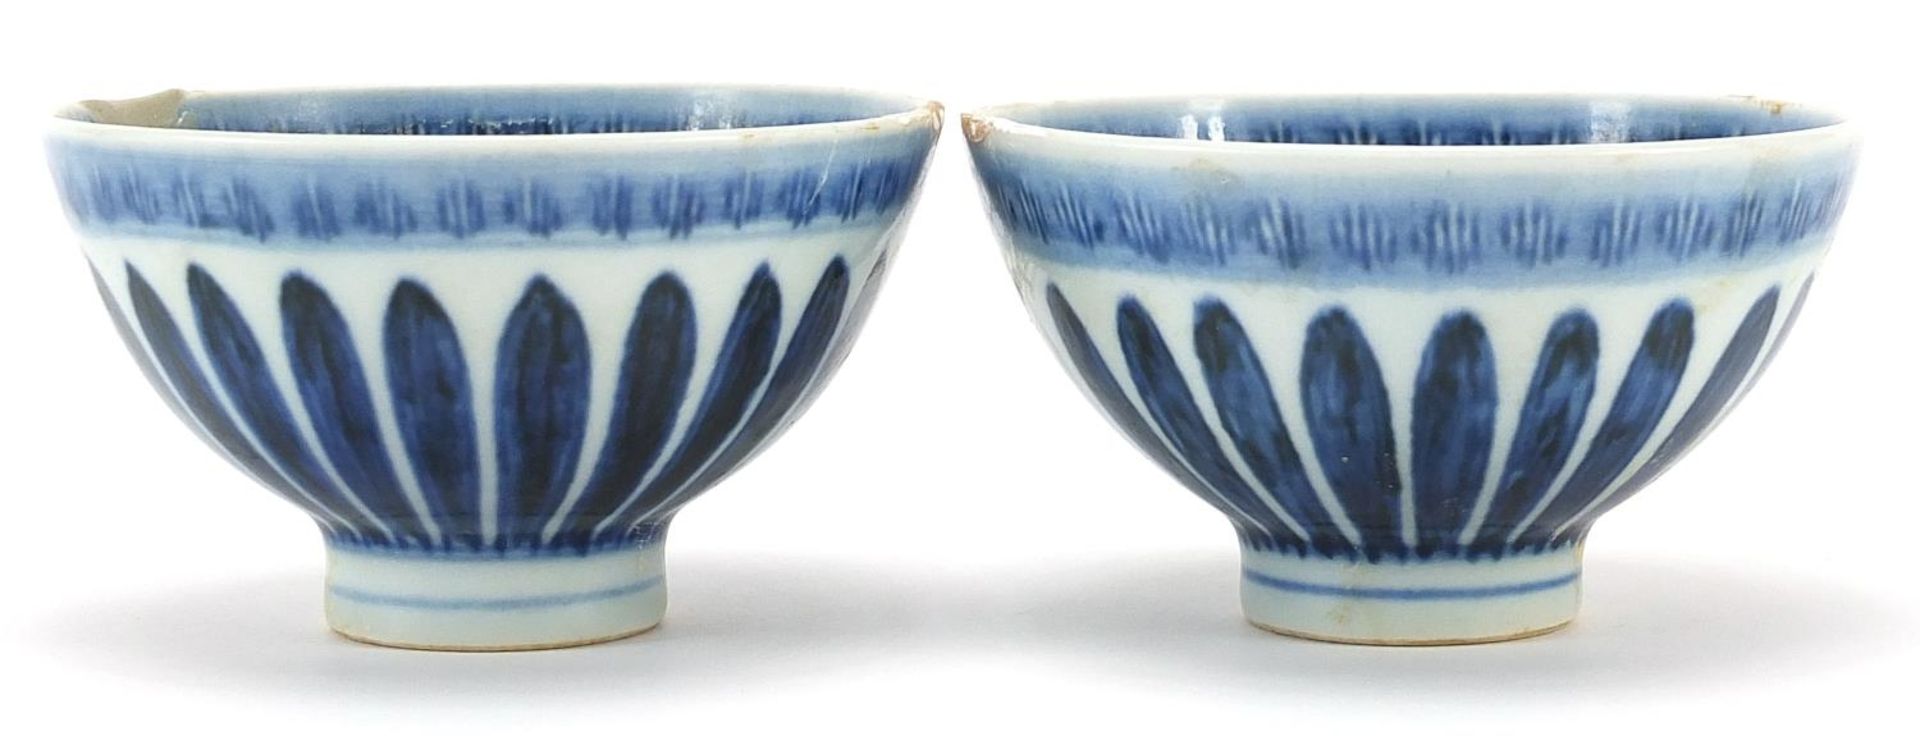 Pair of Chinese blue and white porcelain bowls hand painted with flowers, four figure character - Image 2 of 4